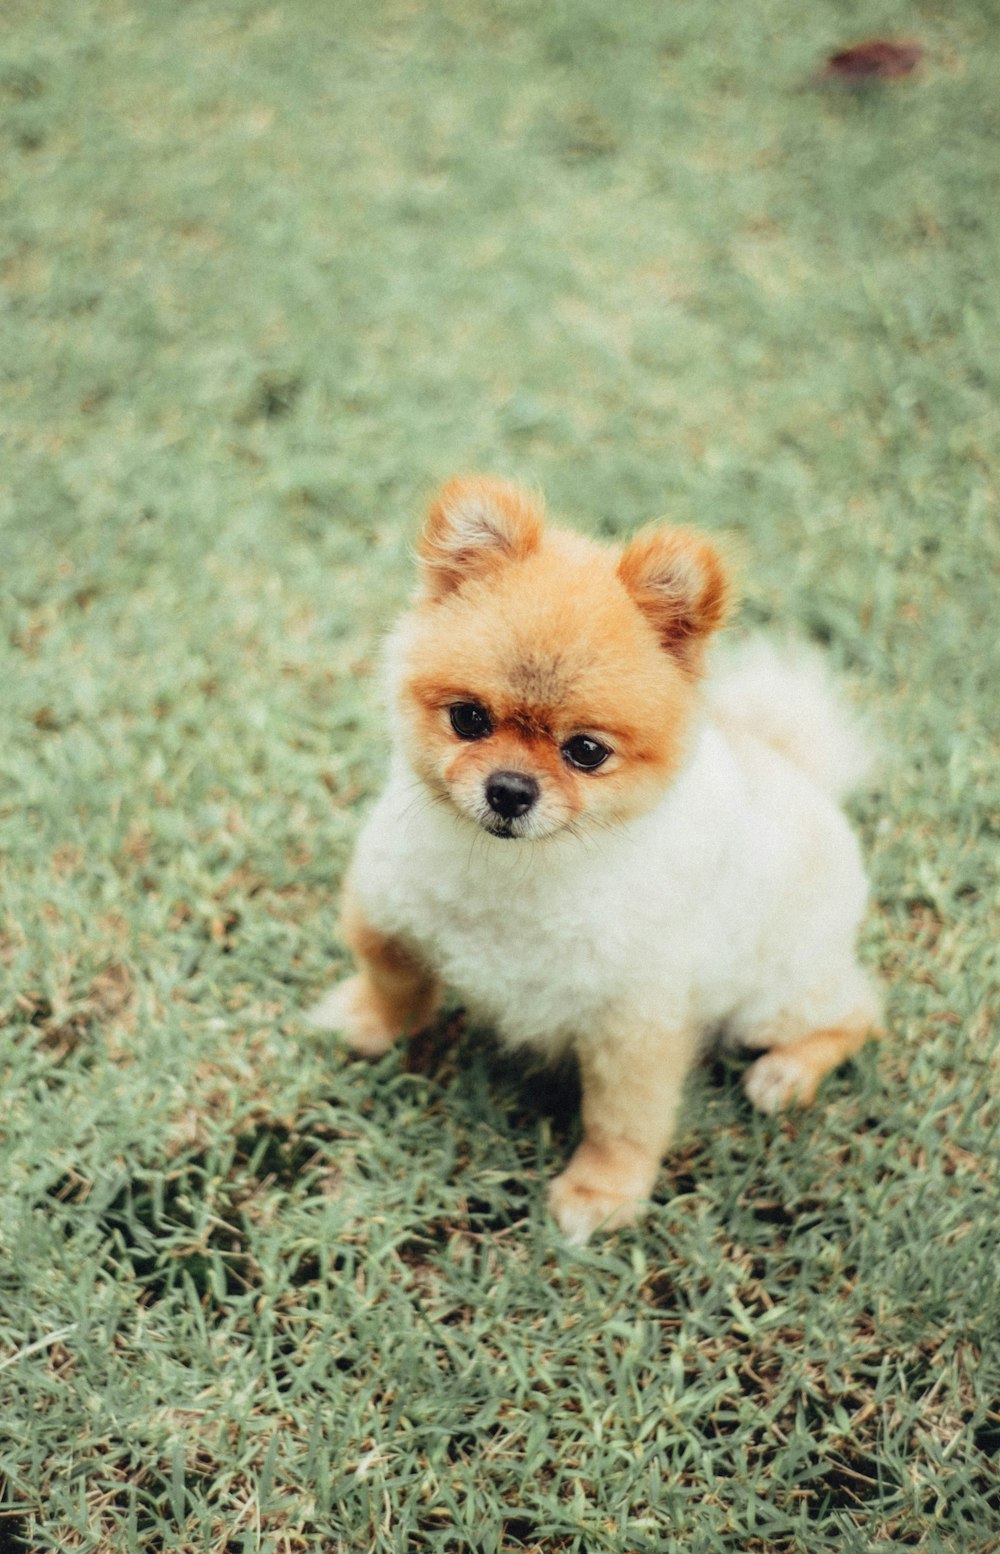 a small dog standing on grass